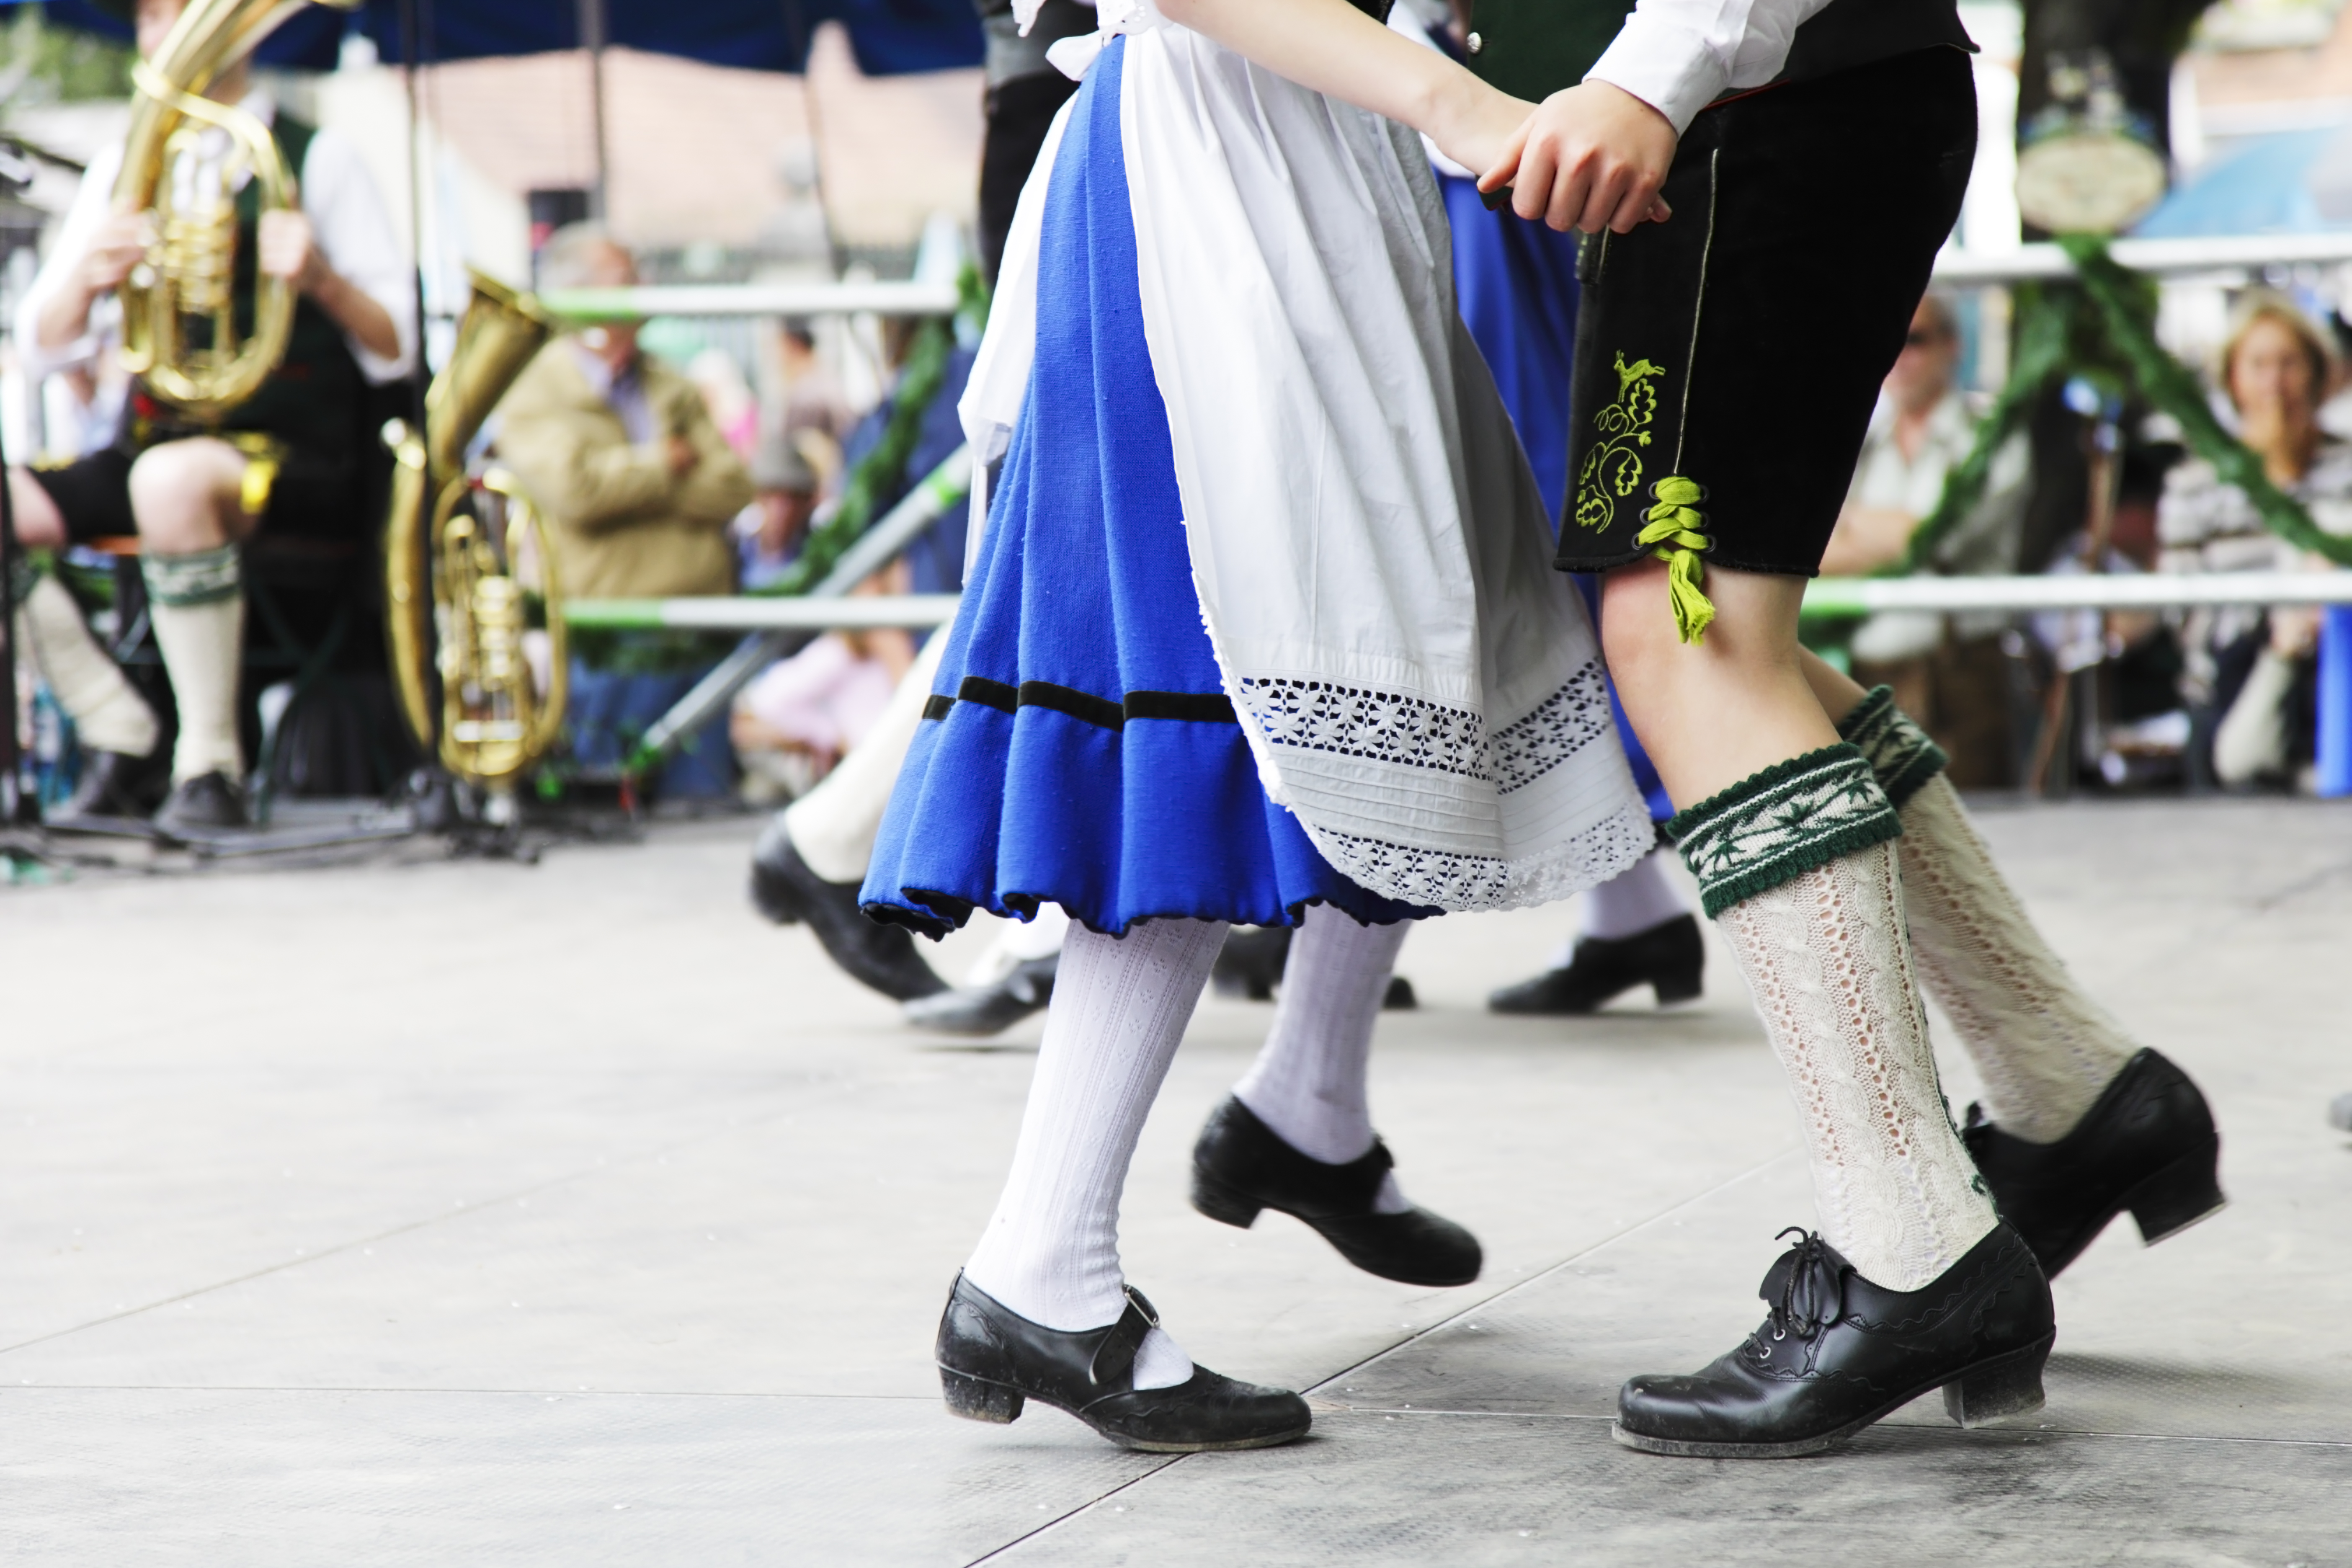 Couple in traditional Bavarian clothing dancing during Wurstfest